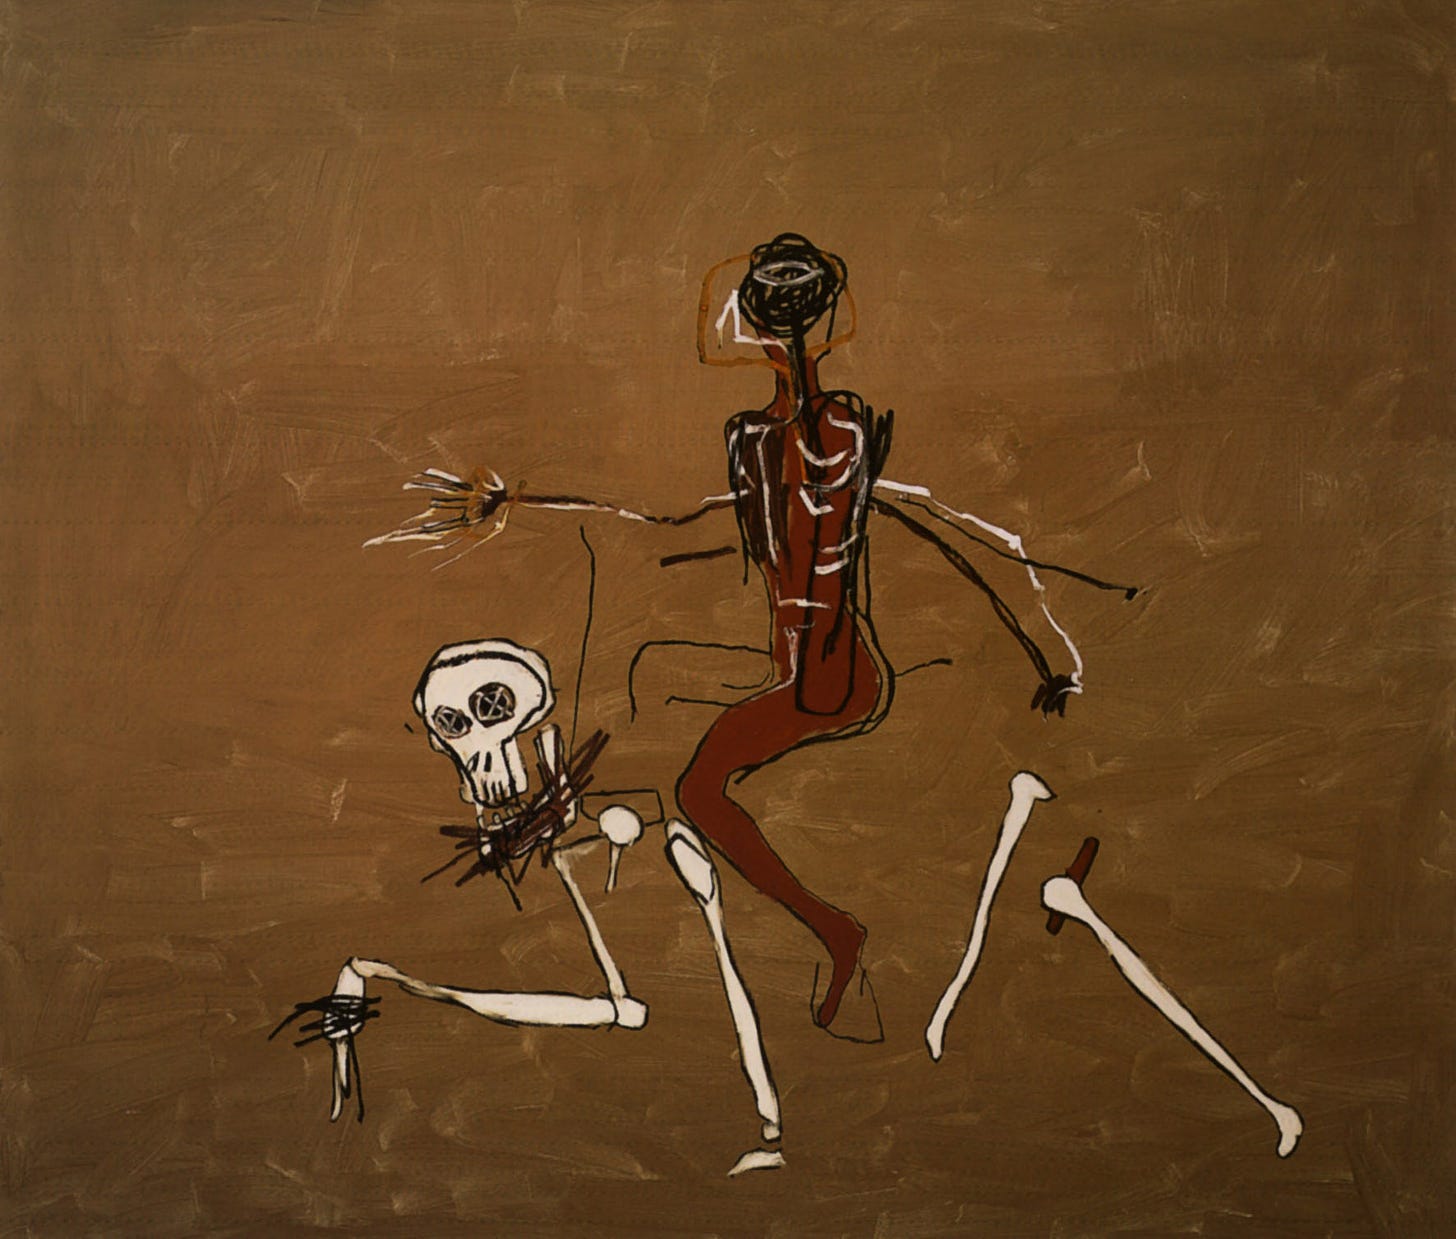 Riding with Death (1988): One of Jean-Michel Basquiat's Last Paintings